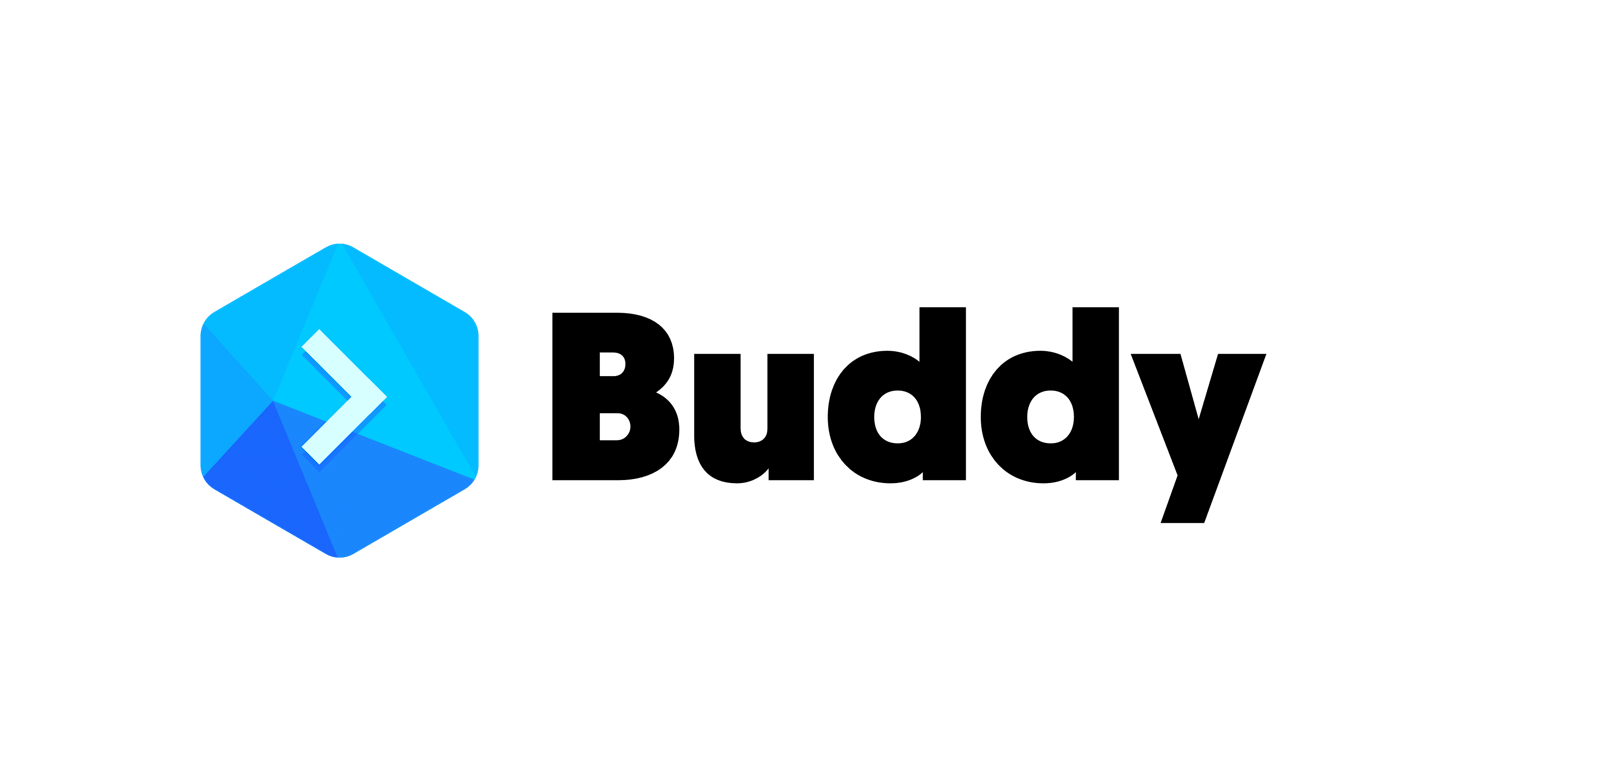 The magic of Buddy Works